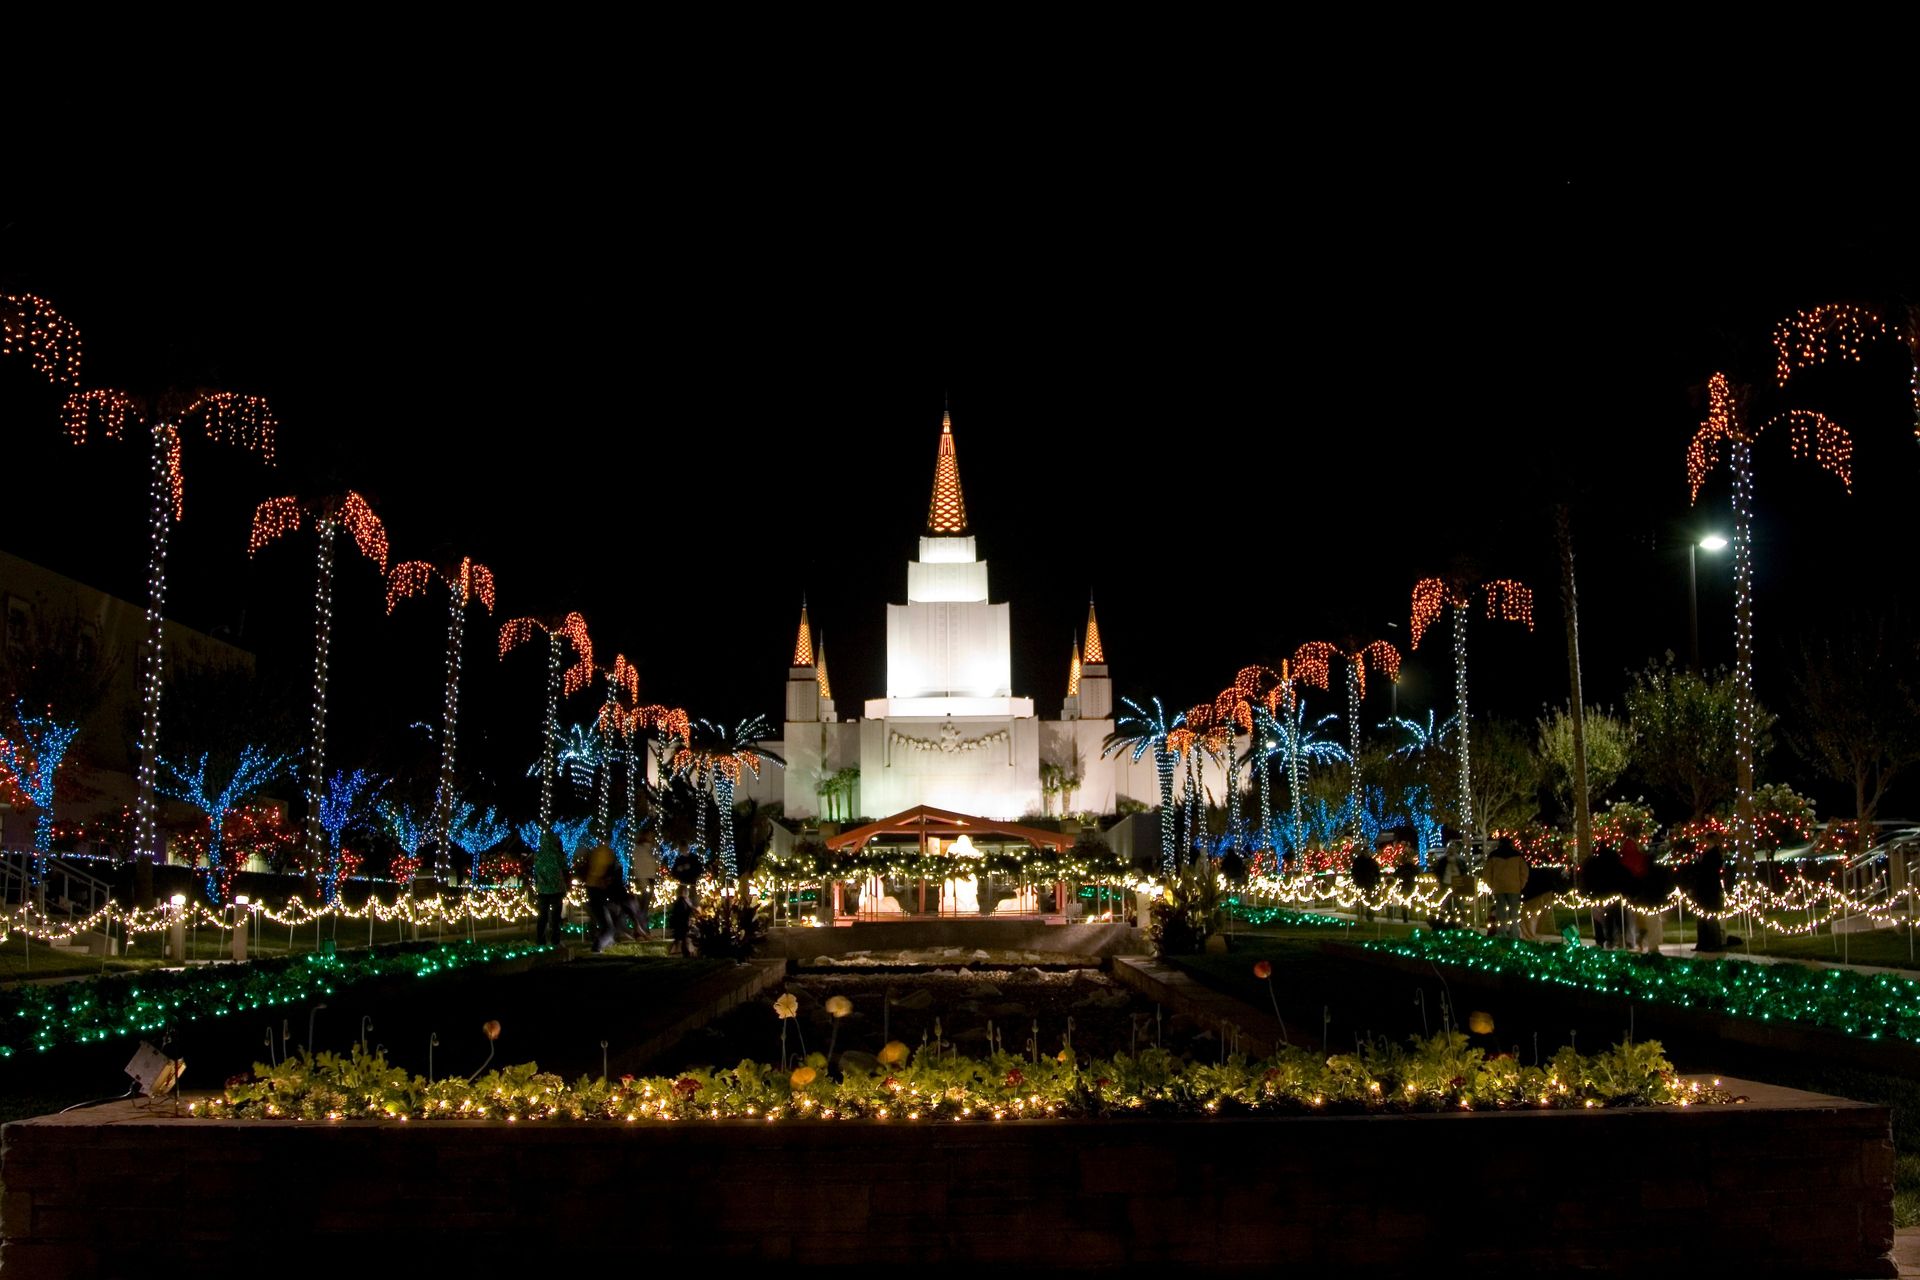 The Oakland California Temple at Christmas, including scenery.